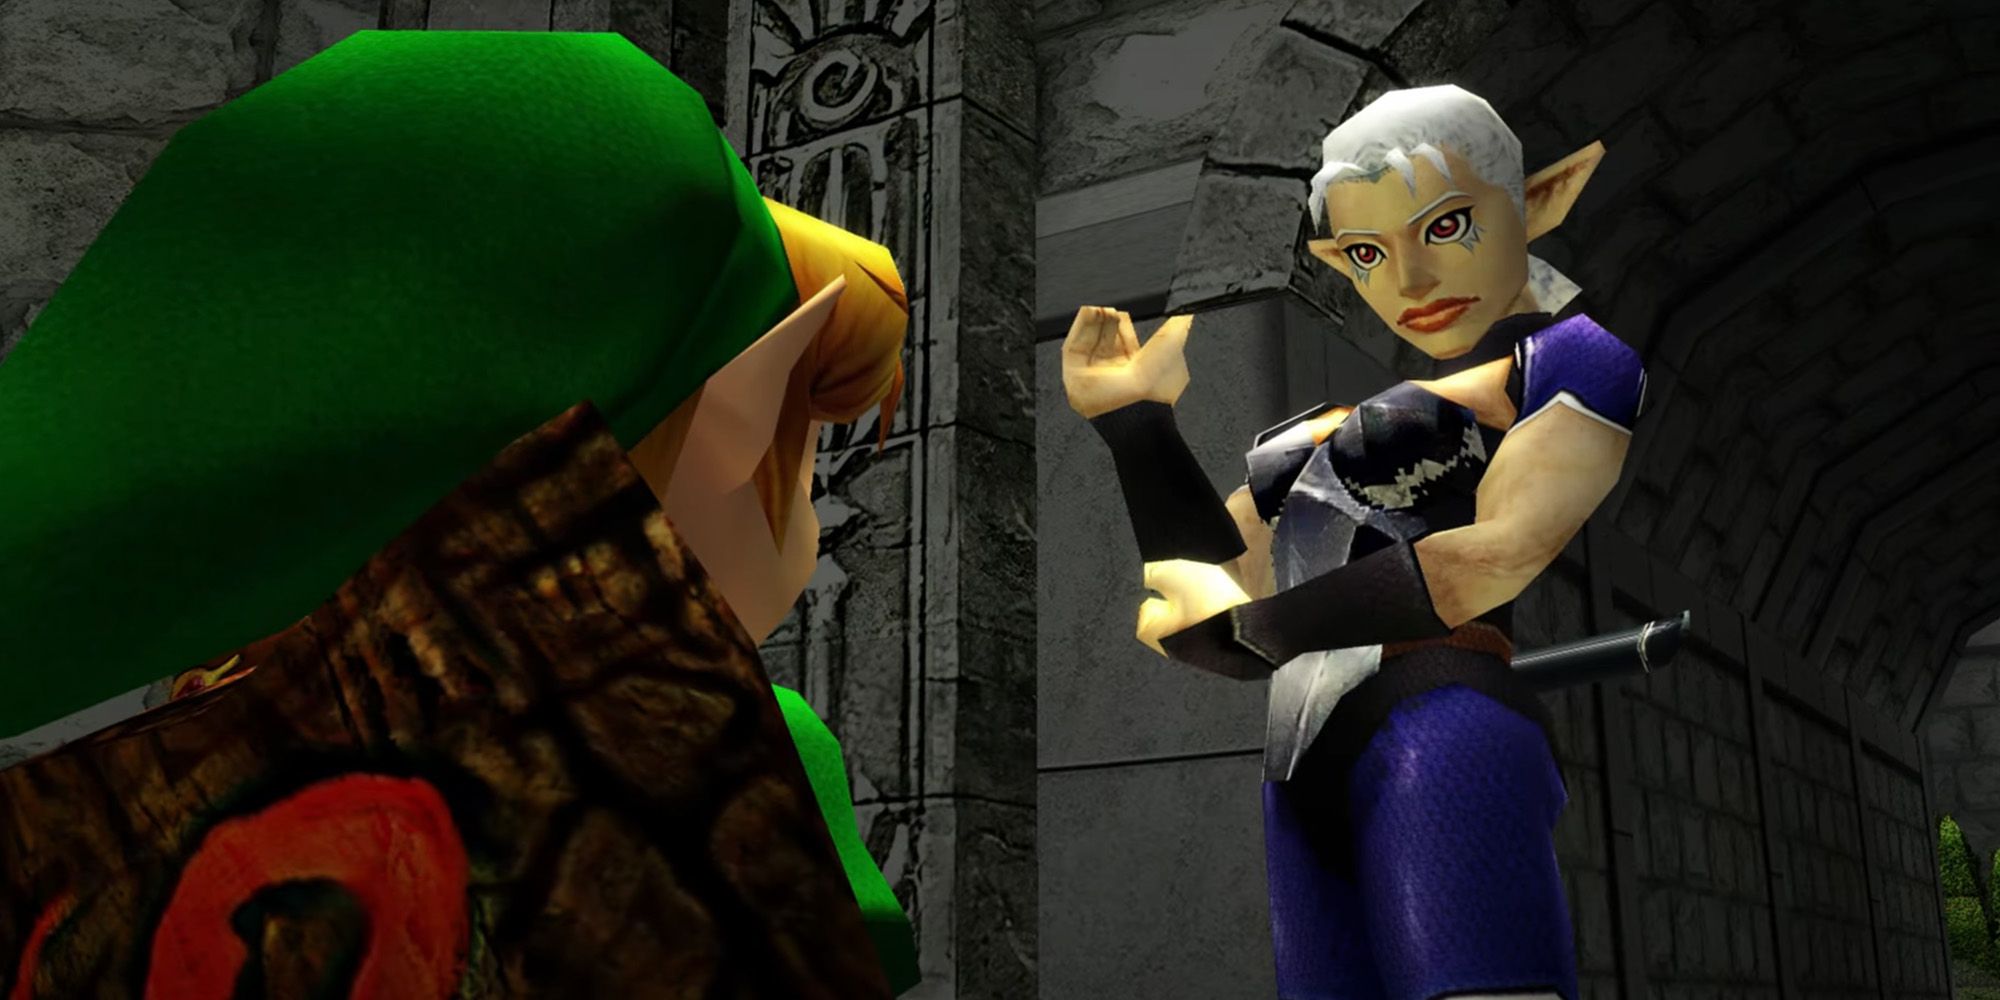 The Legend Of Zelda Ocarina Of Time - Impa talking to Young Link